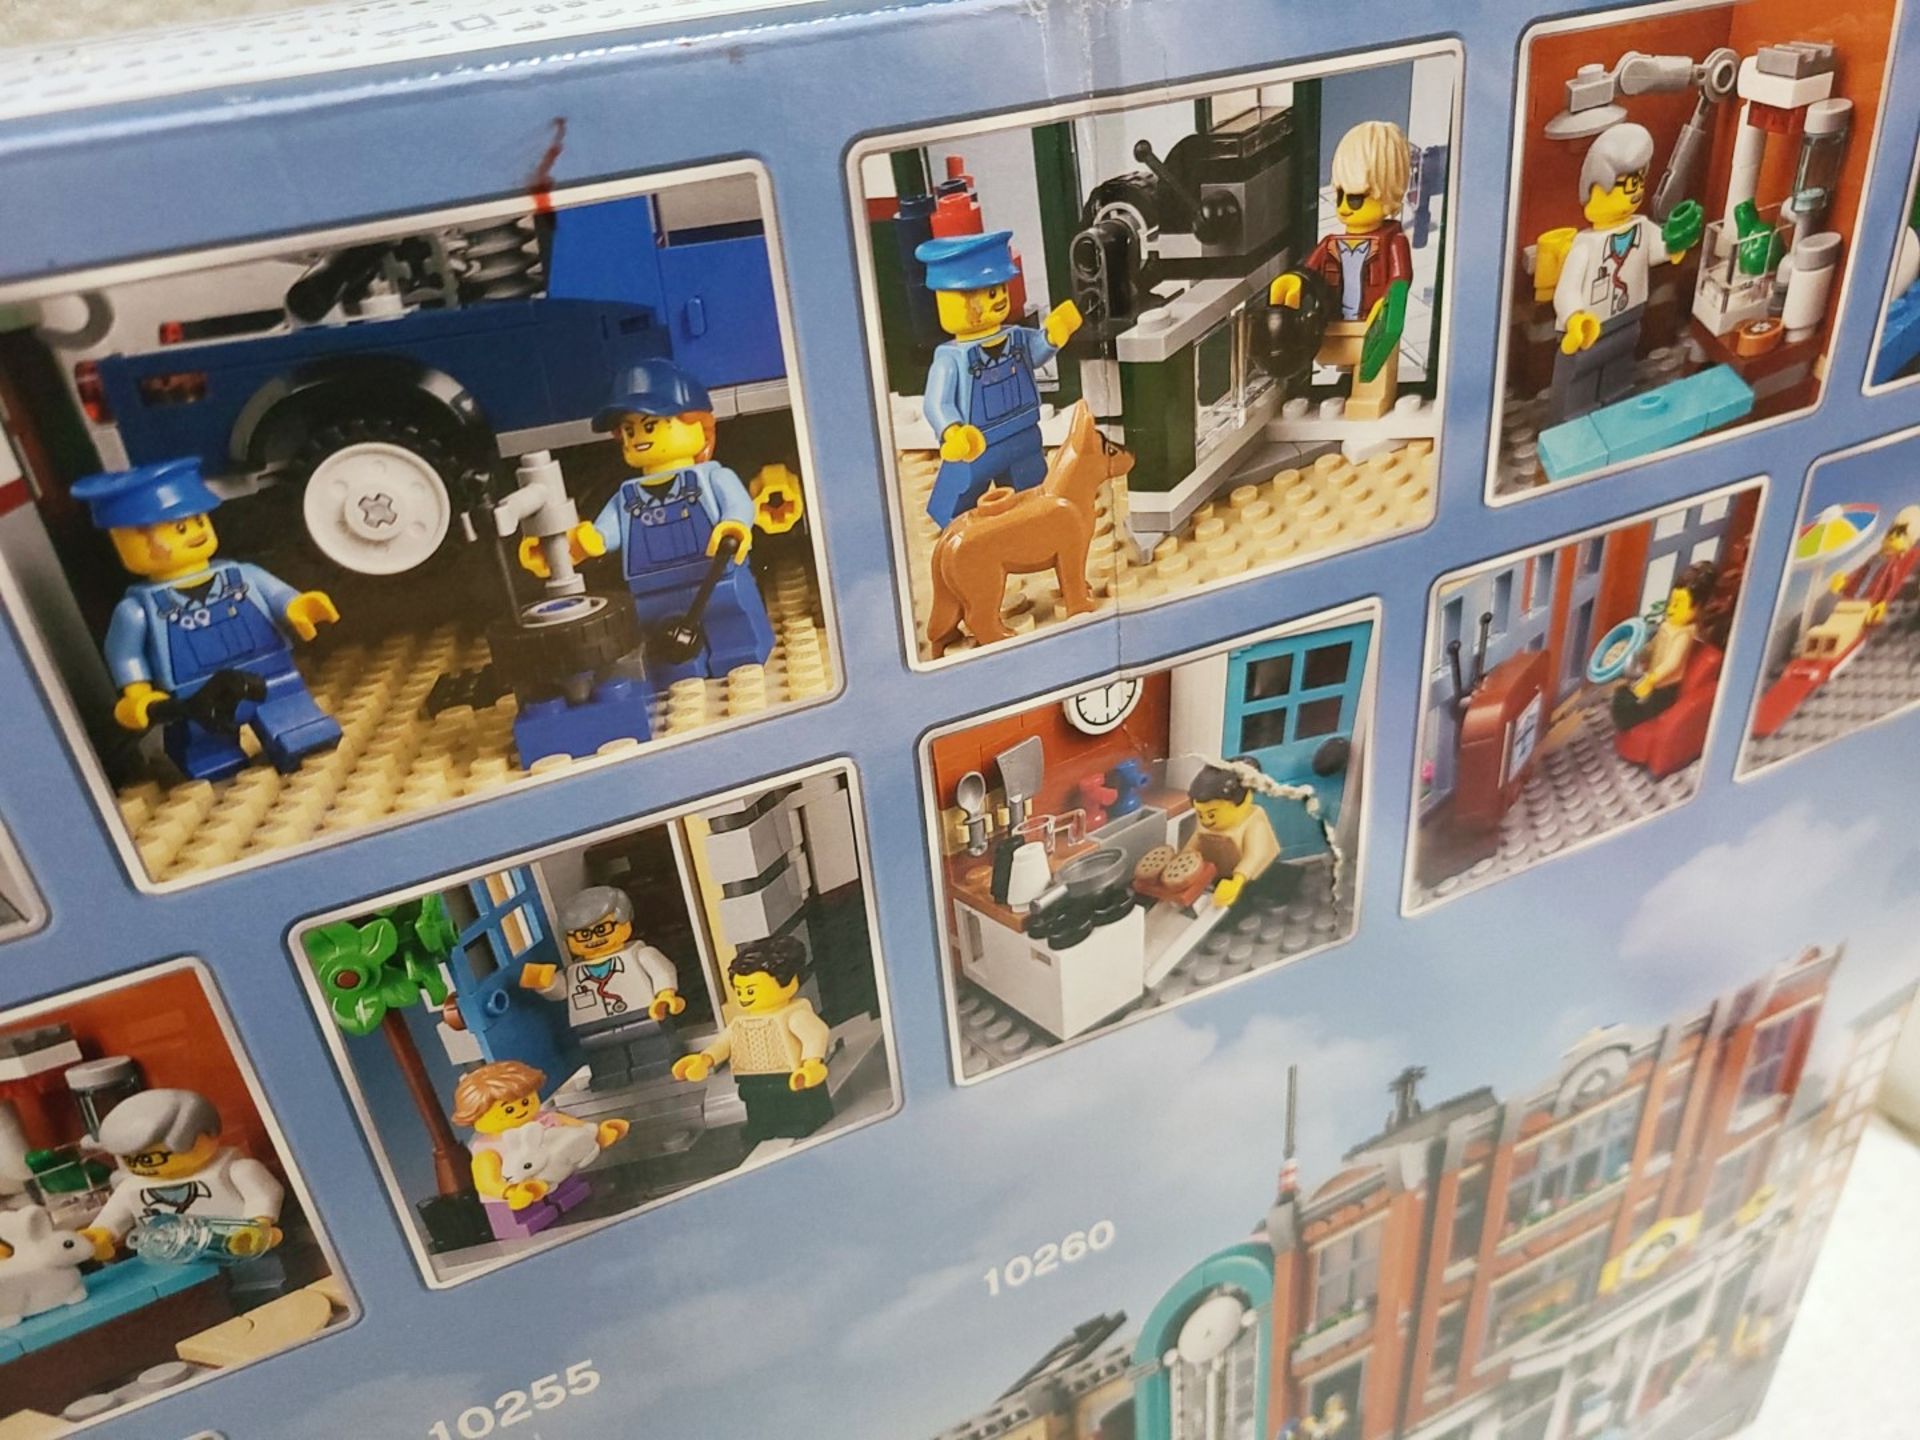 1 x LEGO Creator Expert 10264 Corner Garage And Vet Clinic Set with 6 Minifigures - RRP £260.00 - Image 5 of 5